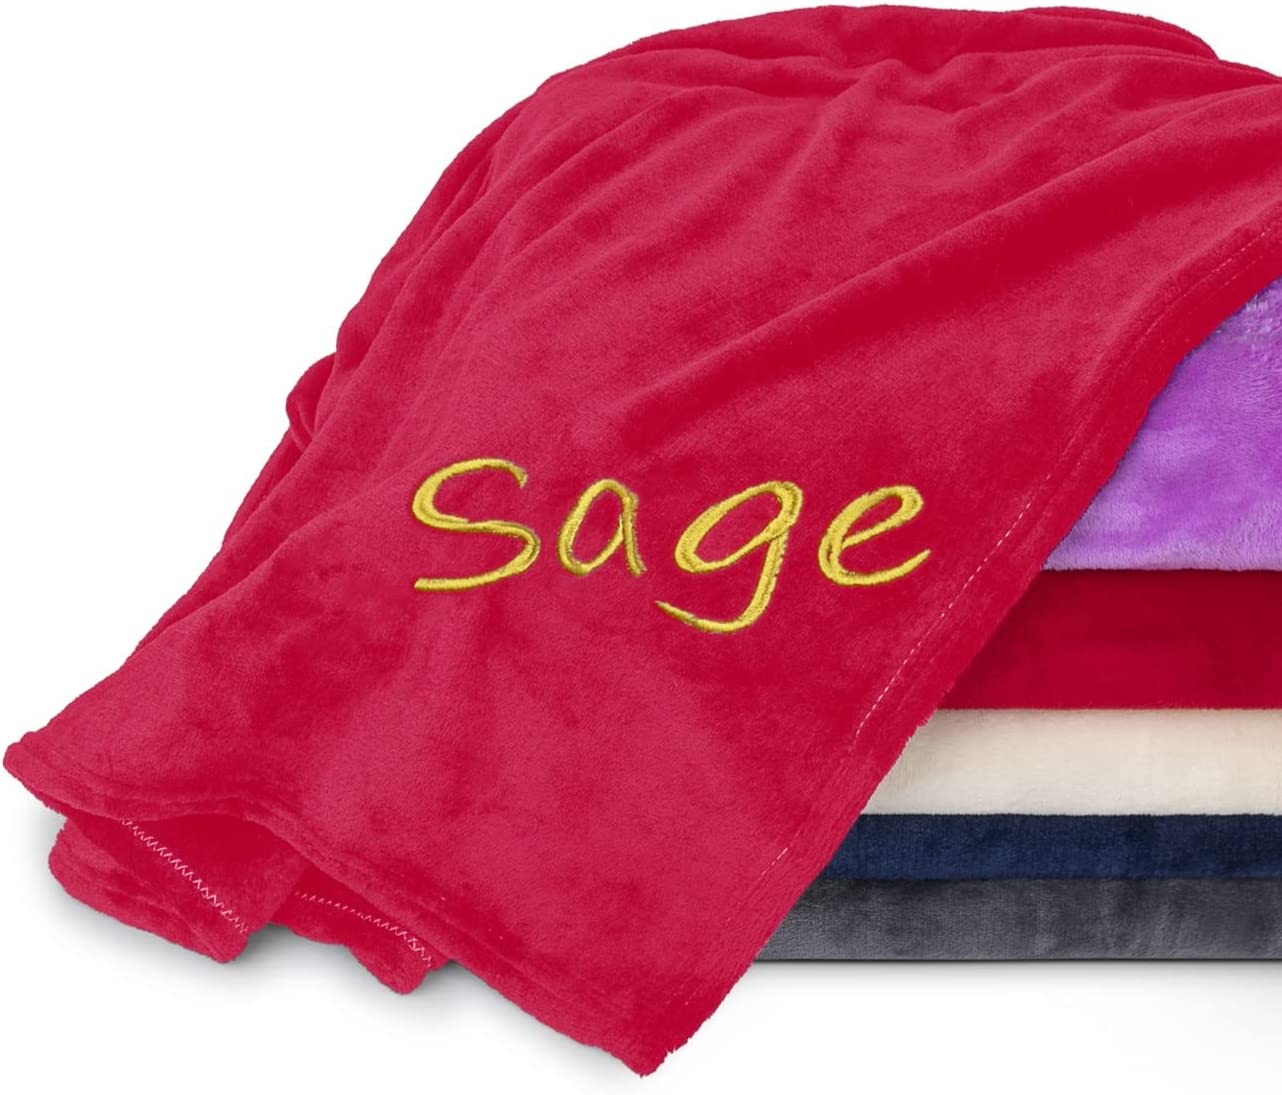 Personalized Blankets for Adults with Embroidered Name in a Variety of Colors